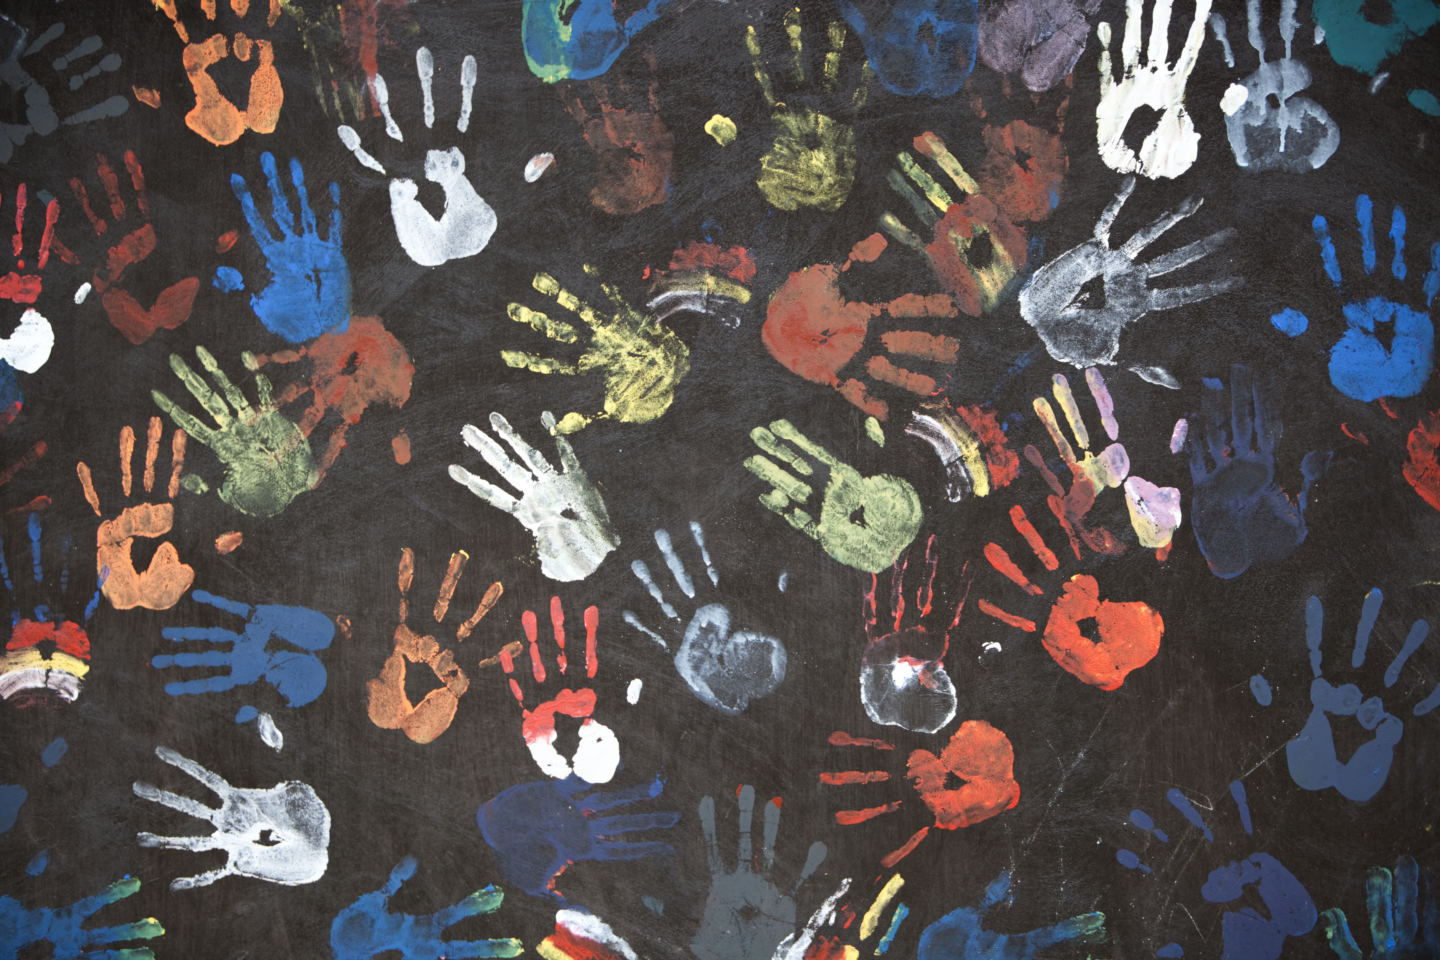 "colorful children's handprints on a textured black wall - fragment of a busstop wall in Bali, Indonesia"